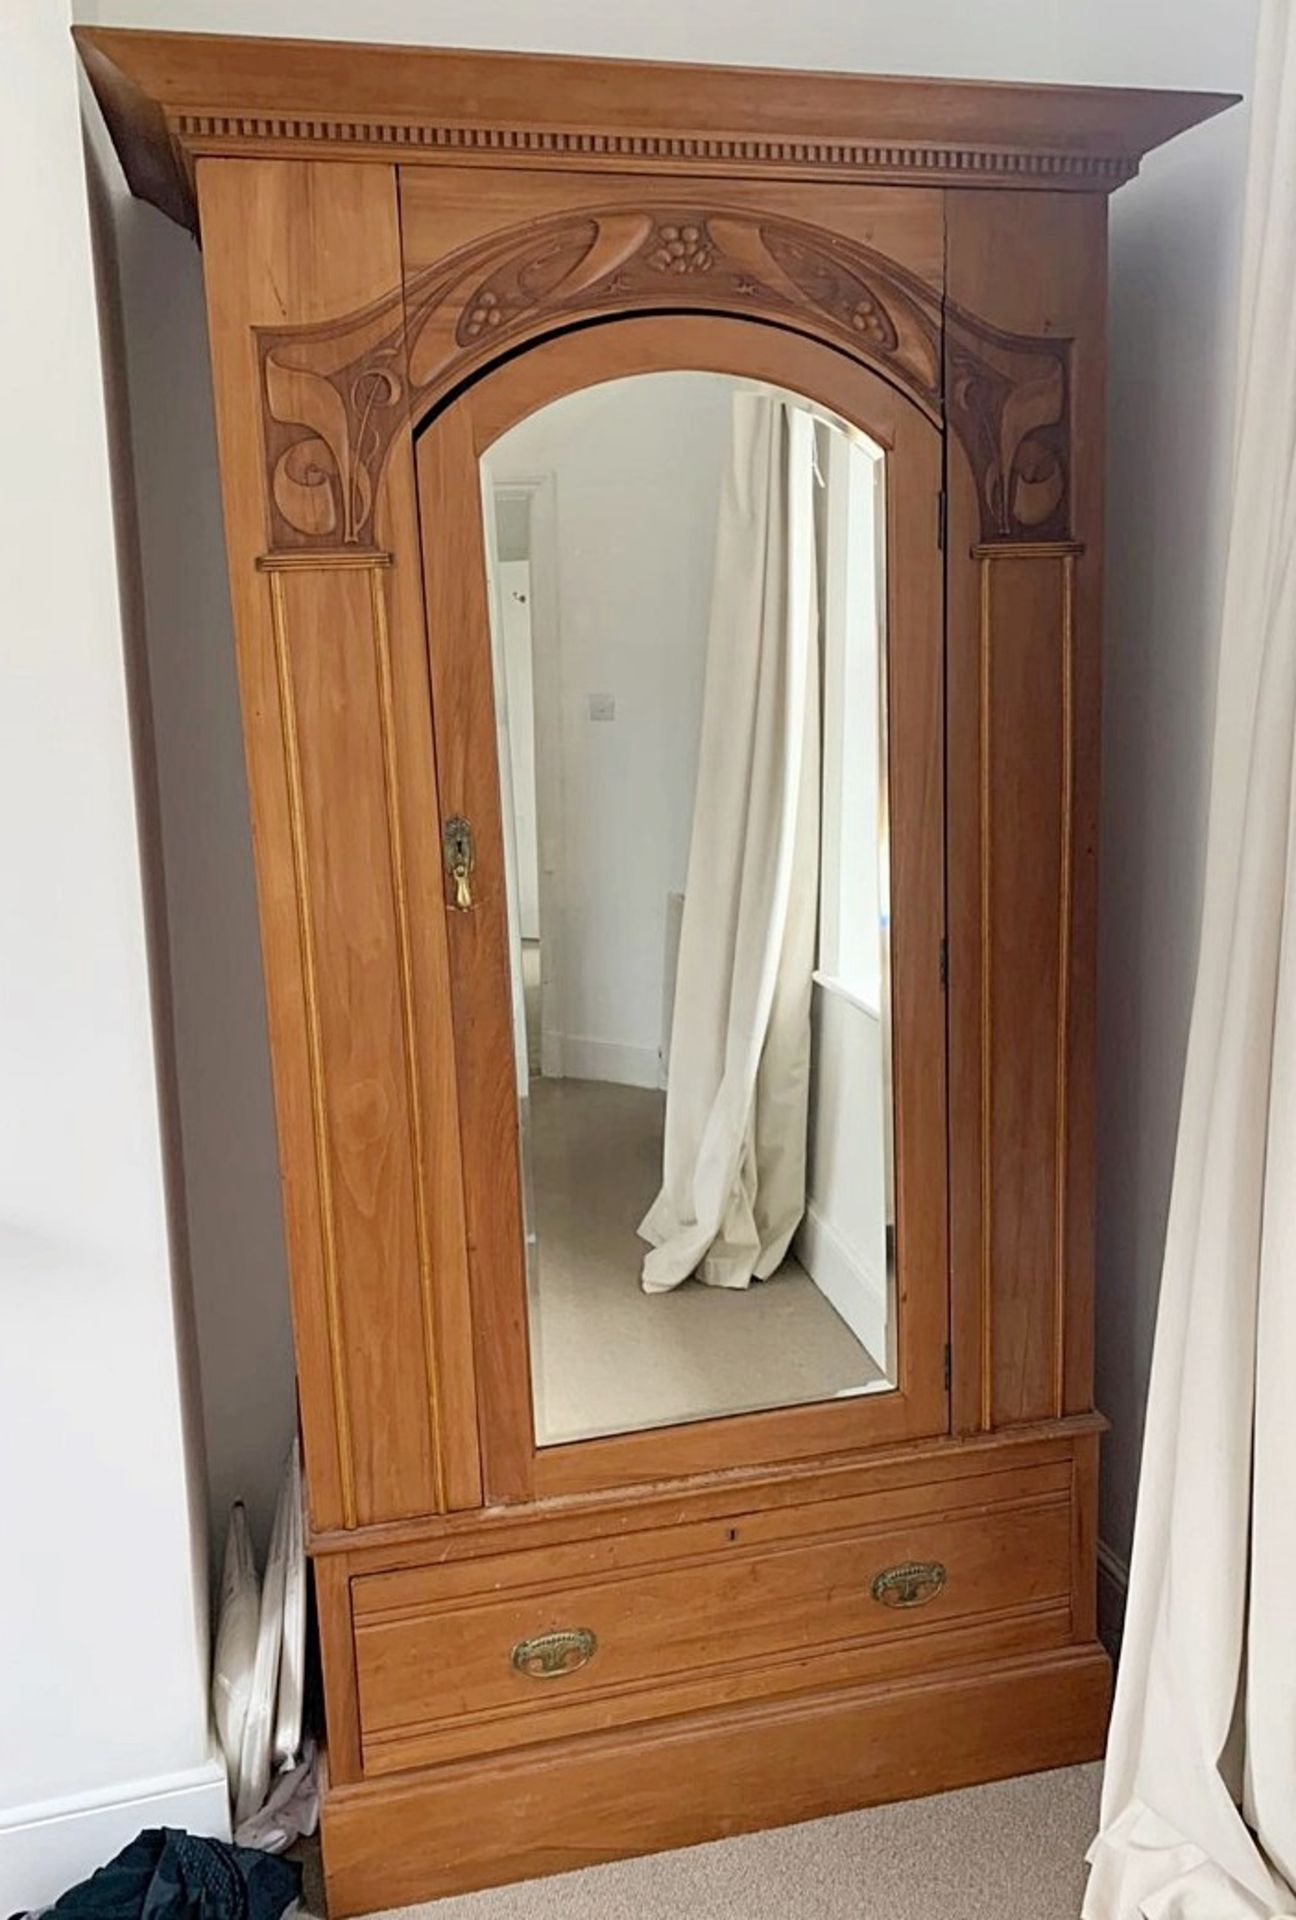 1 x Solid Wood 1-Door, 1-Drawer Wardrobe With Art Nouveau Style Carving On The Front - Dimensions: